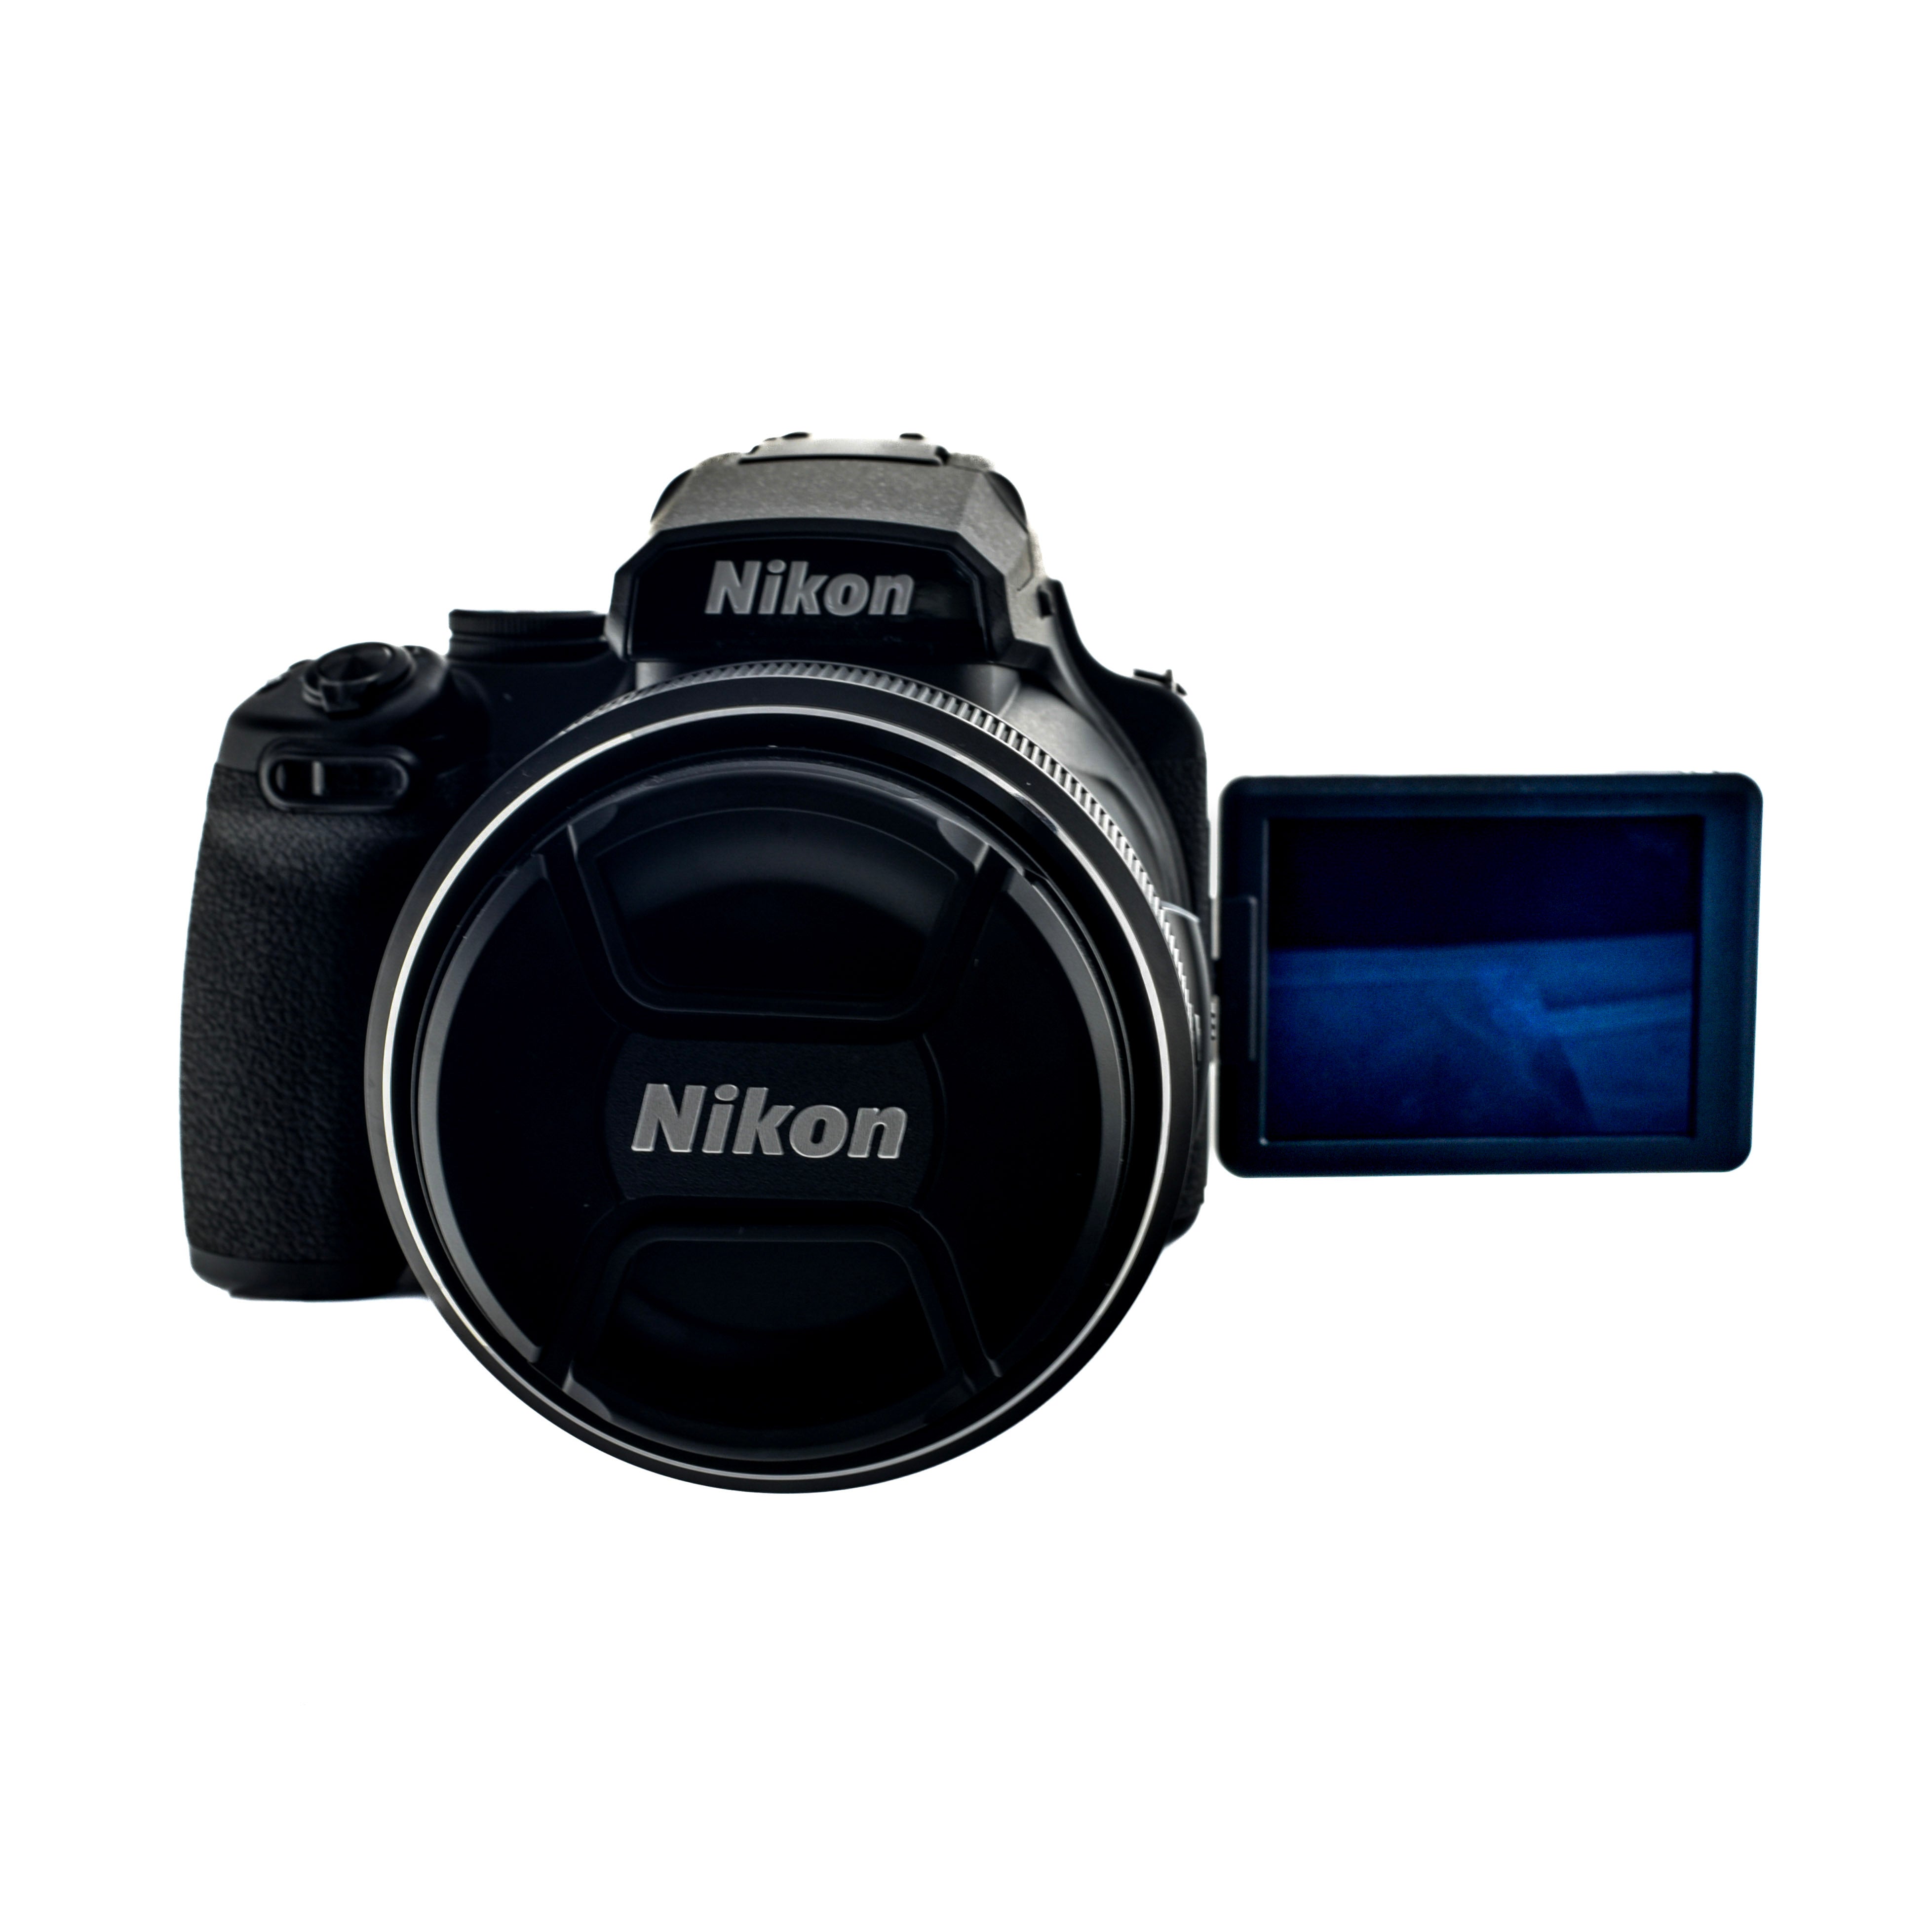 Nikon COOLPIX P1000 Digital Camera with Professional Additional Accessories  